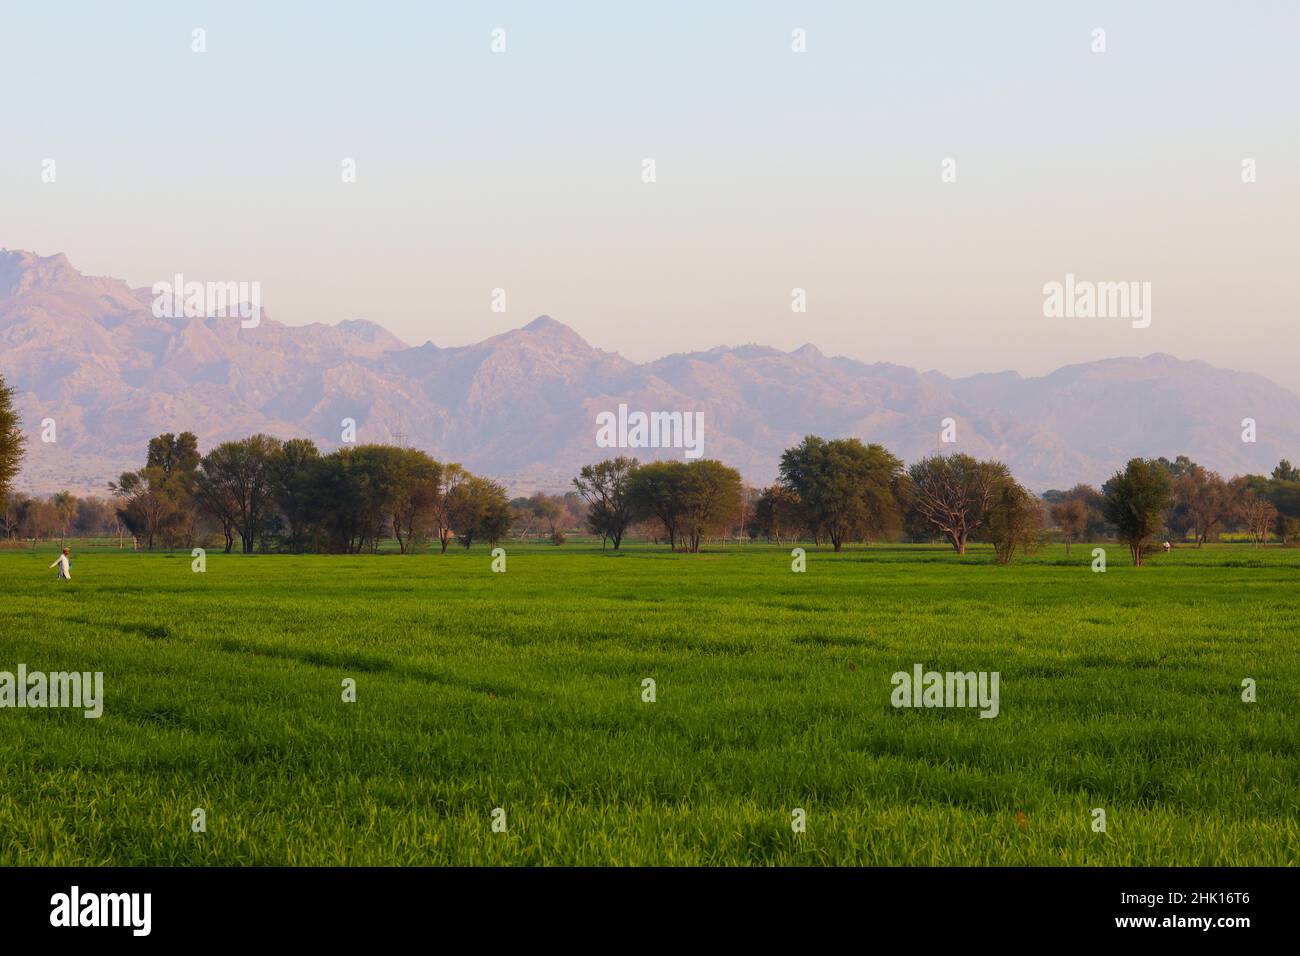 Mountains and tree in a village of Pakistan Stock Photo